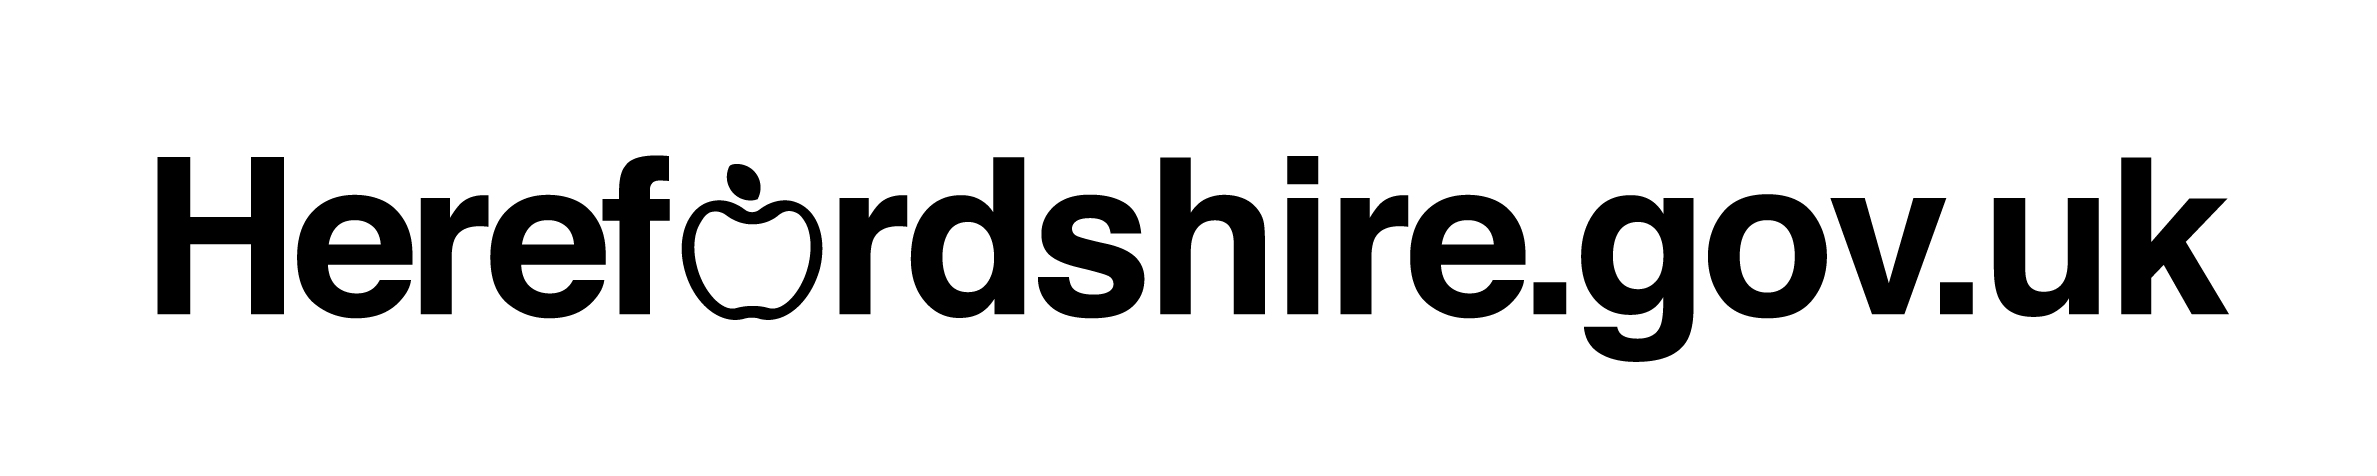 Herefordshire council logo